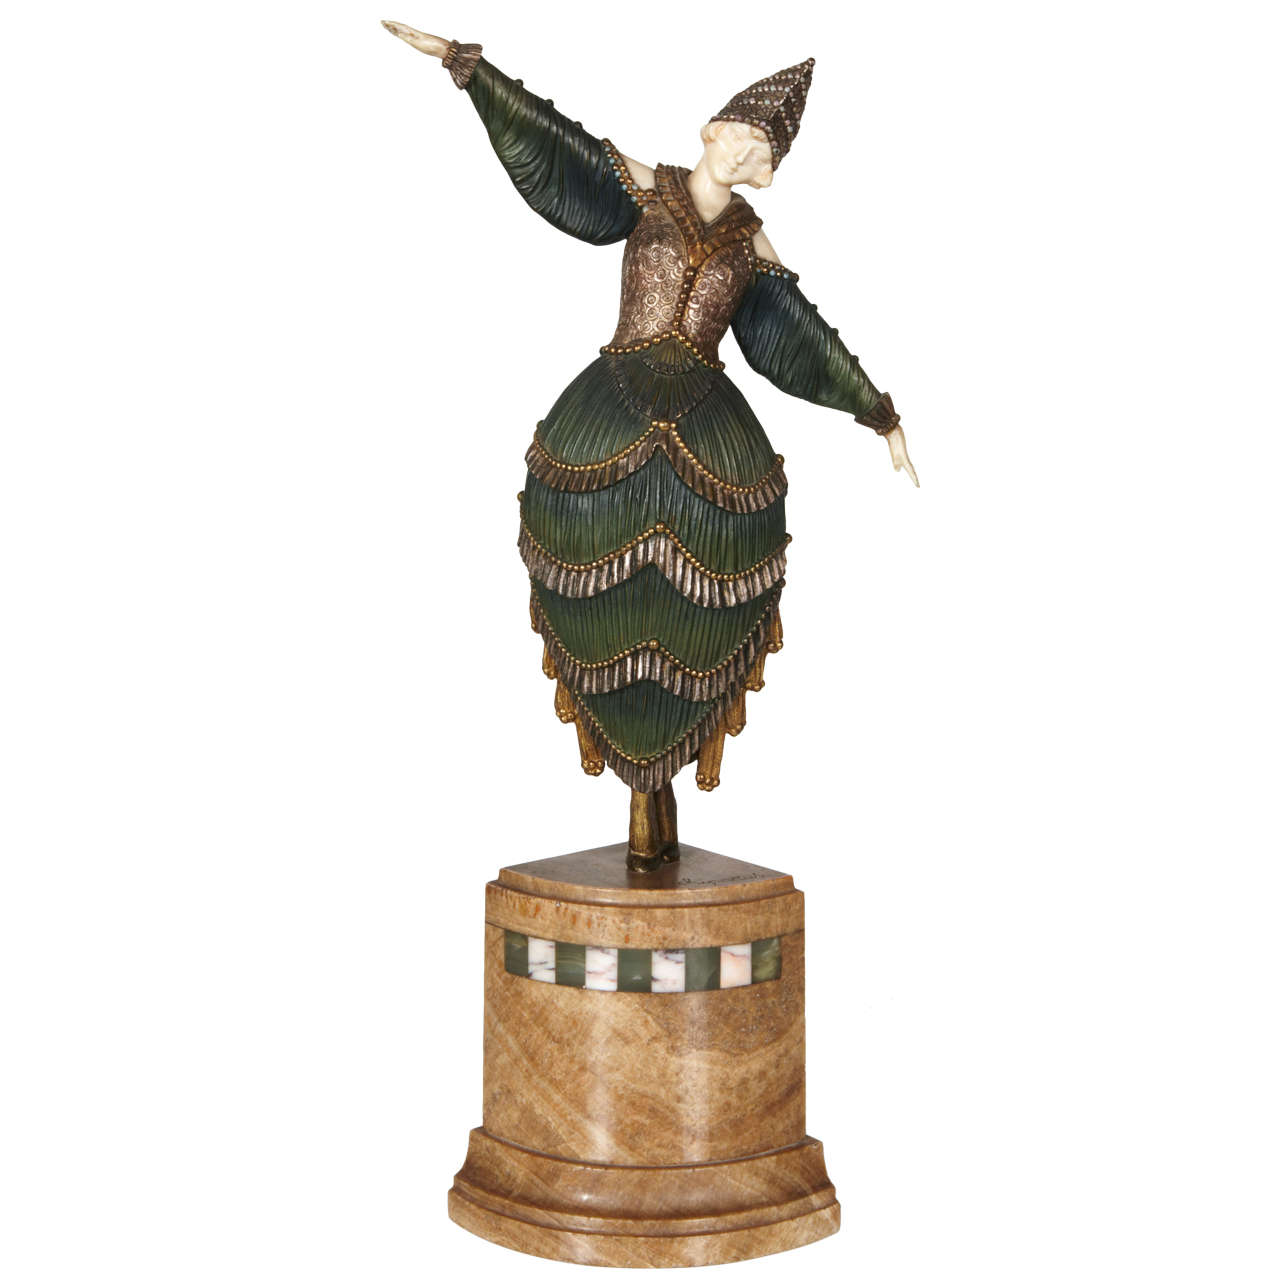 1925 Demetre Chiparus Bronze and Ivory Sculpture, "Carnival"